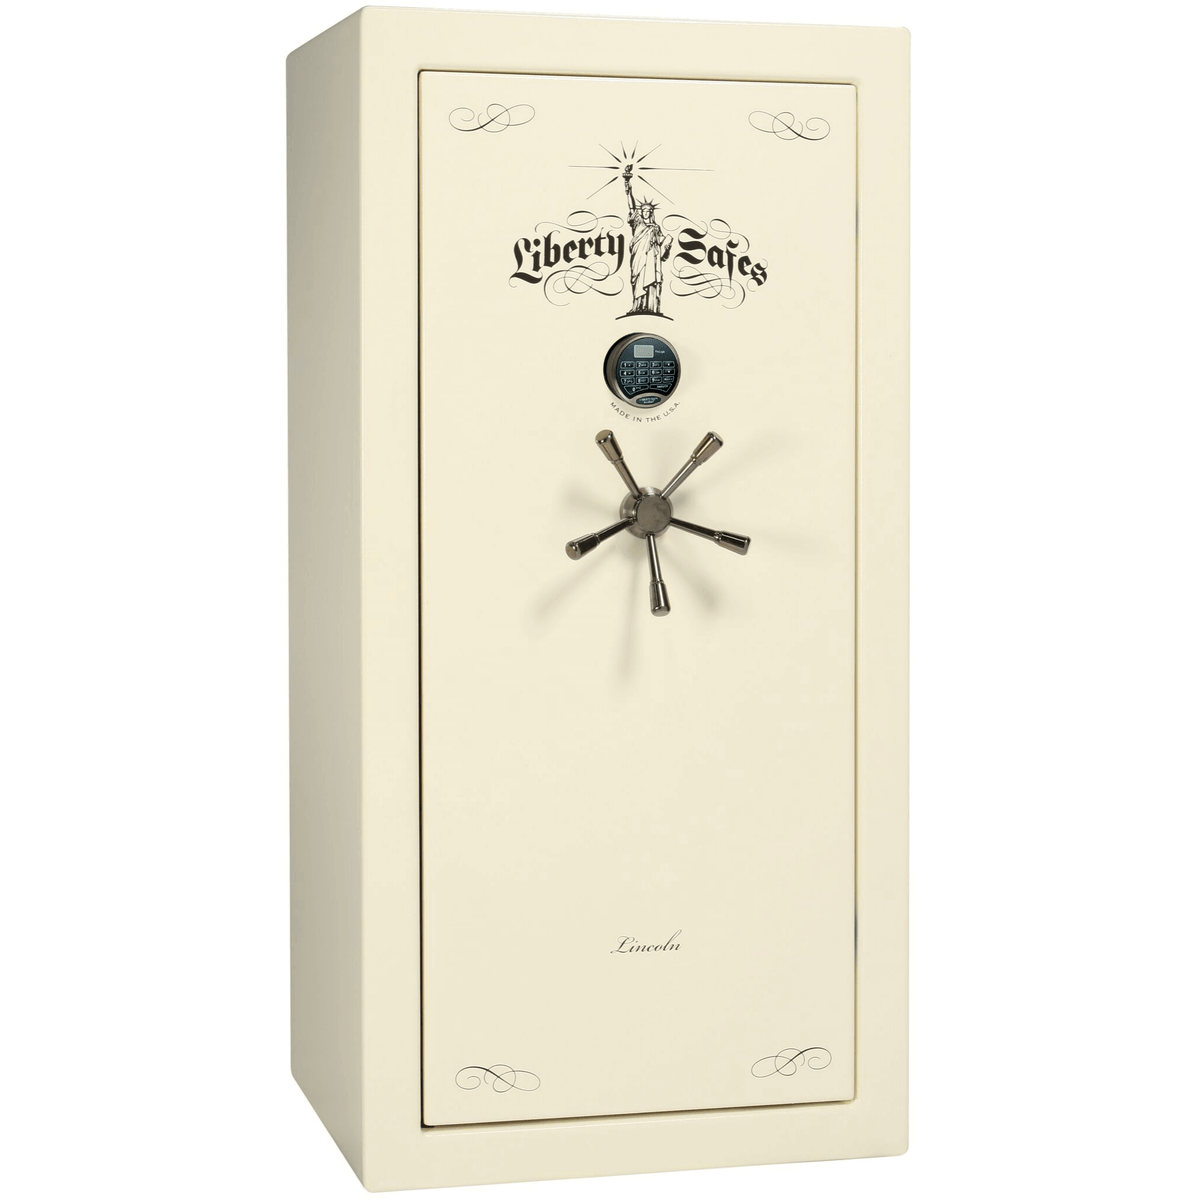 Liberty Lincoln 25 Safe in White Marble with Black Chrome Electronic Lock.